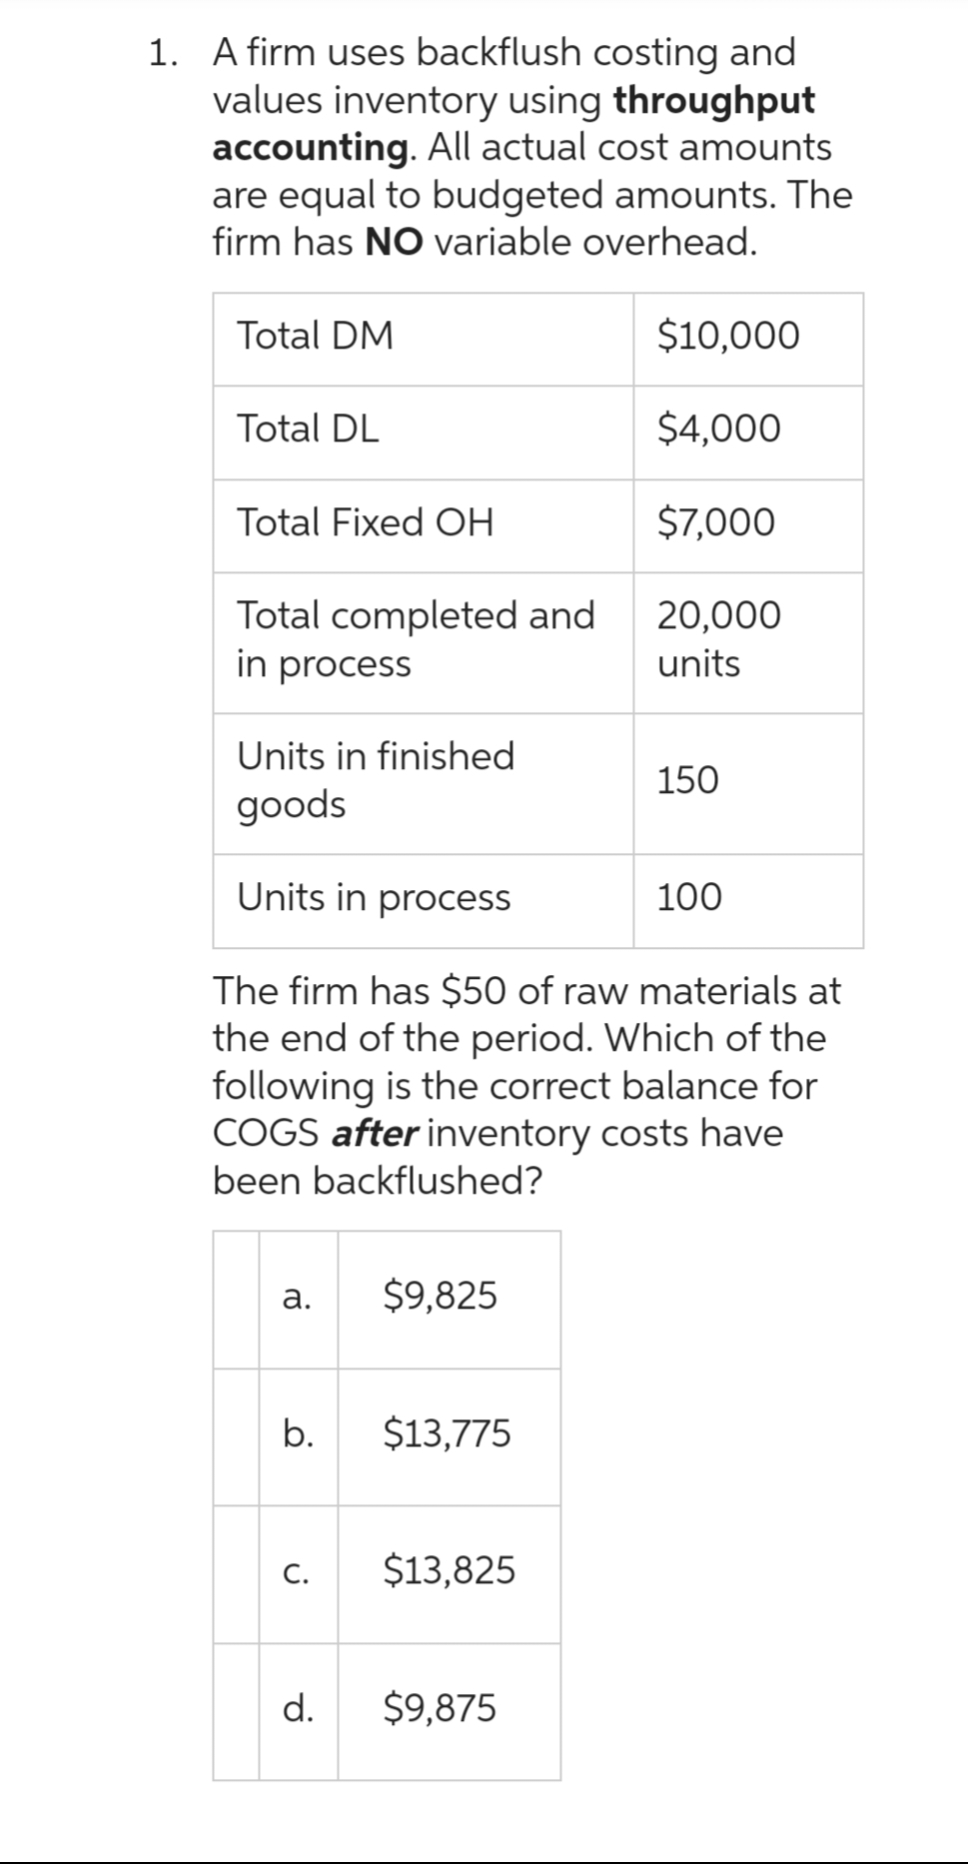 1. A firm uses backflush costing and
values inventory using throughput
accounting. All actual cost amounts
are equal to budgeted amounts. The
firm has NO variable overhead.
Total DM
Total DL
Total Fixed OH
Total completed and
in process
a.
Units in finished
goods
Units in process
The firm has $50 of raw materials at
the end of the period. Which of the
following is the correct balance for
COGS after inventory costs have
been backflushed?
b.
C.
d.
$9,825
$13,775
$13,825
$10,000
$4,000
$7,000
$9,875
20,000
units
150
100